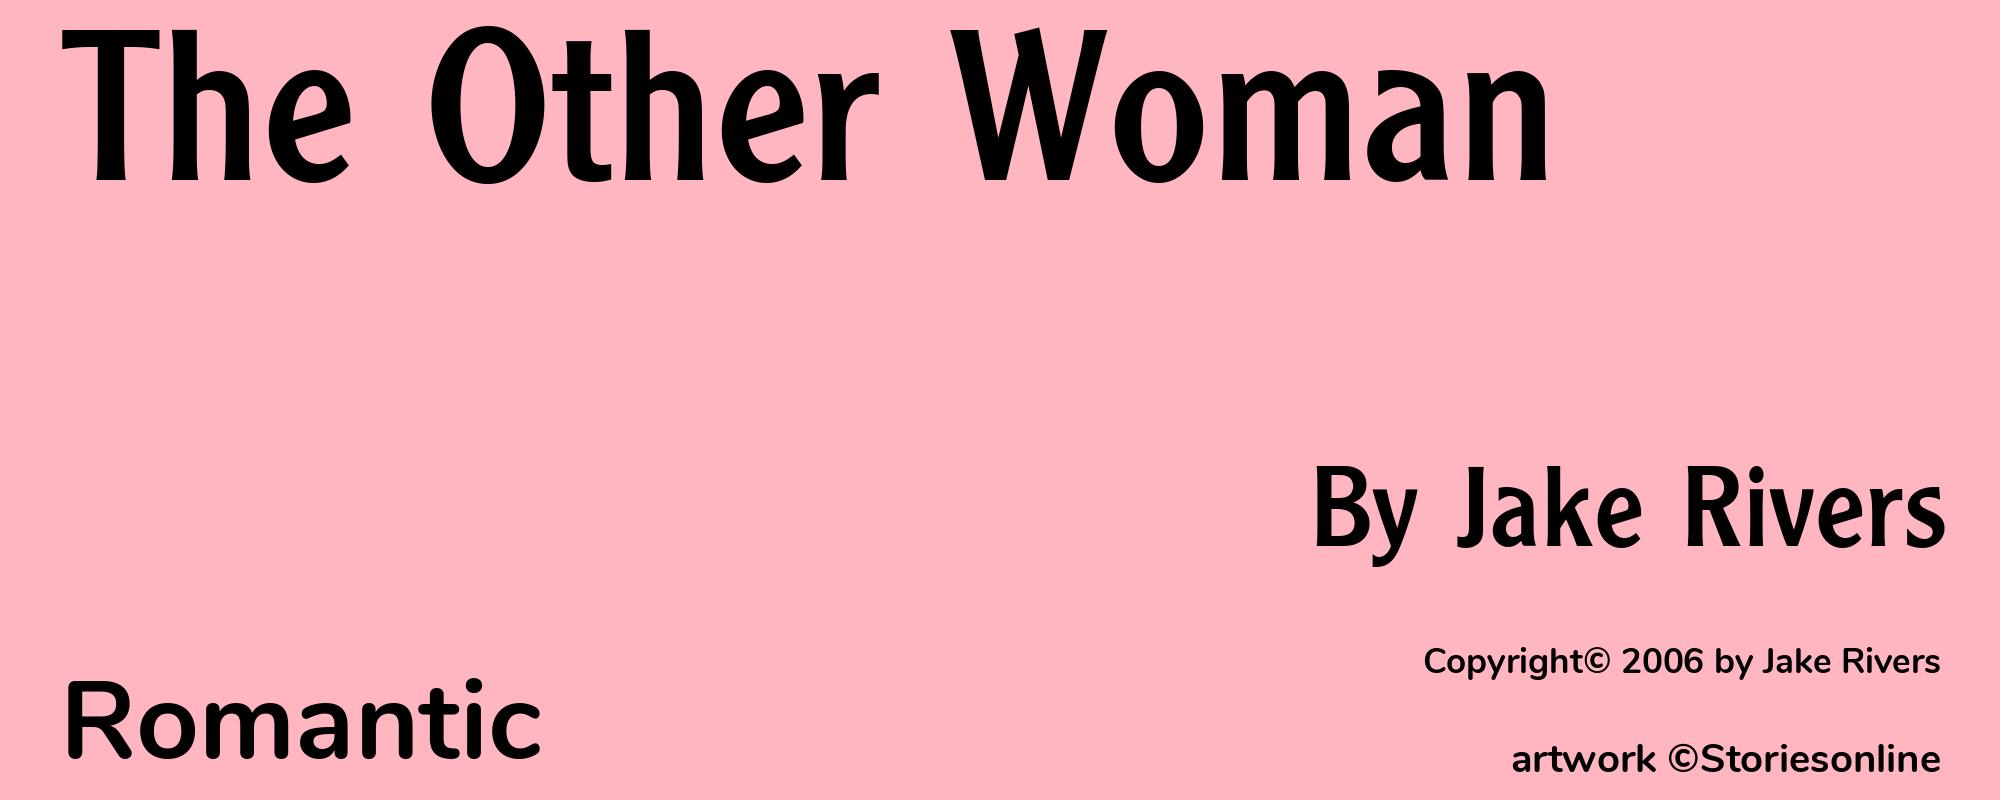 The Other Woman - Cover